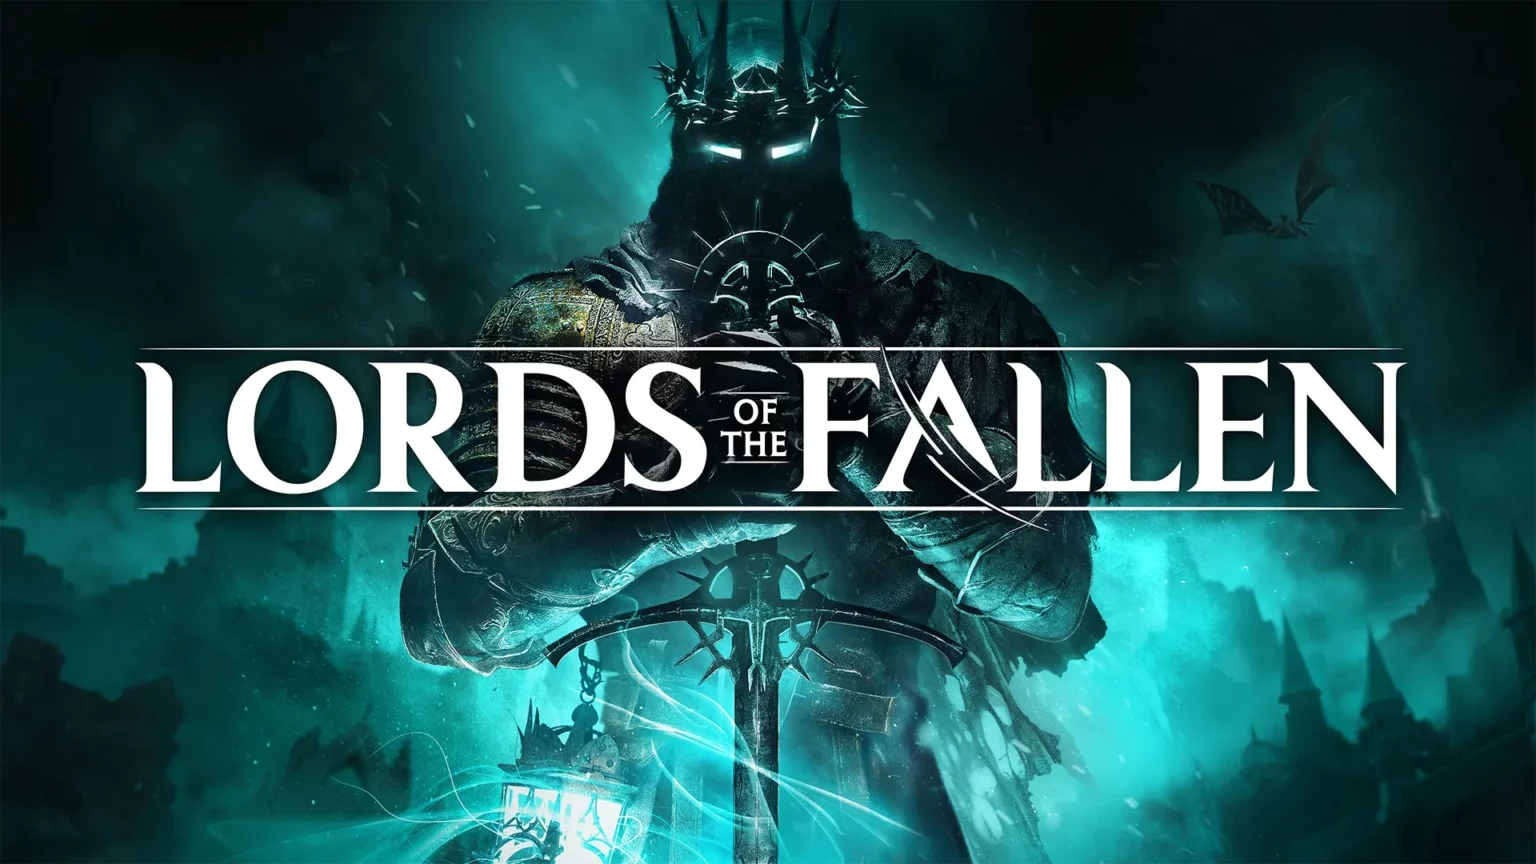 New The Lords Of The Fallen trailer is giving major Dark Souls